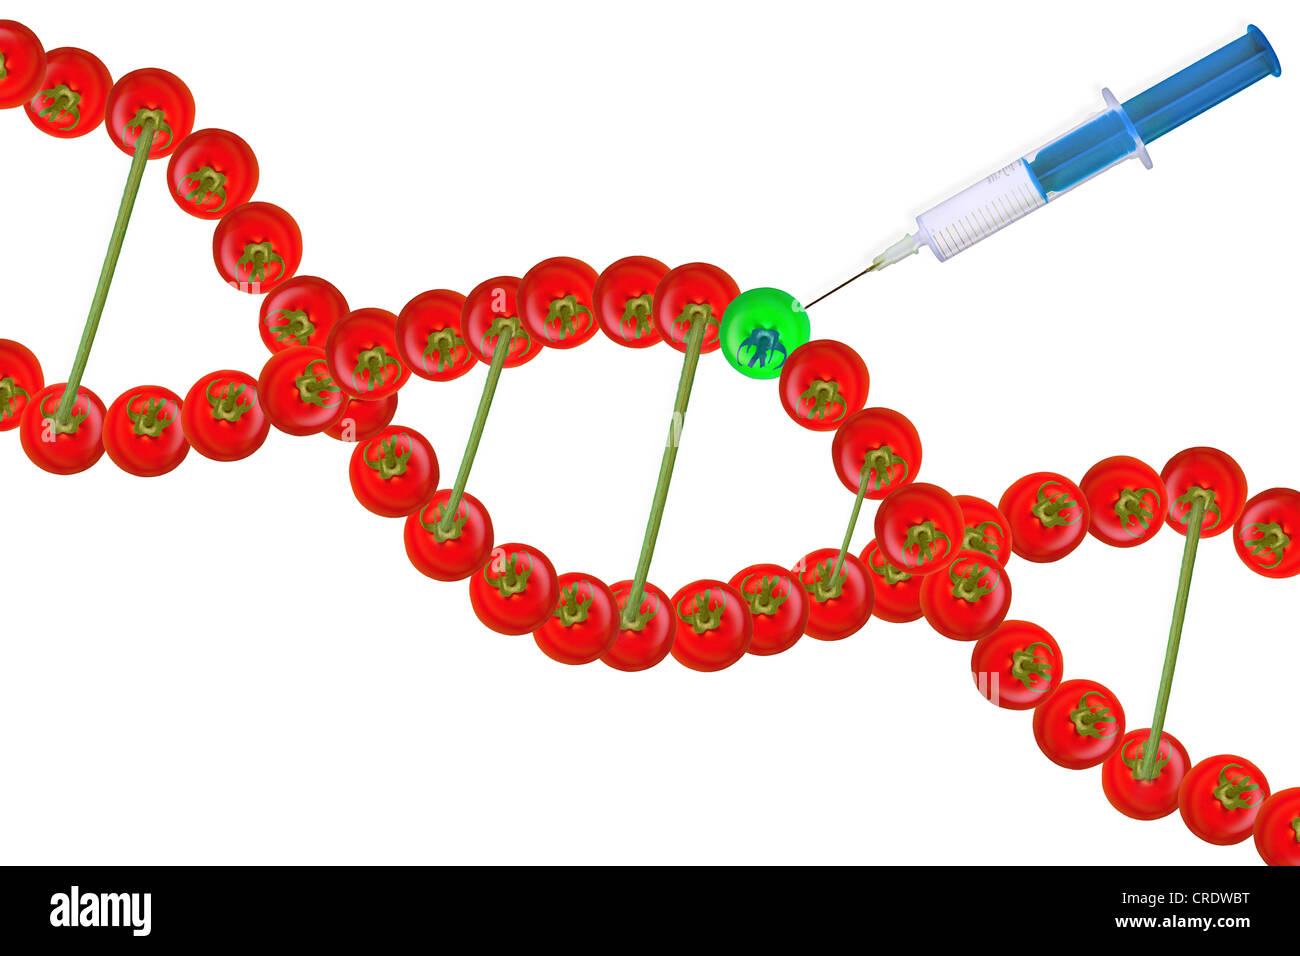 DNA strands from red tomatoes, a green tomato is injected with a syringe Stock Photo